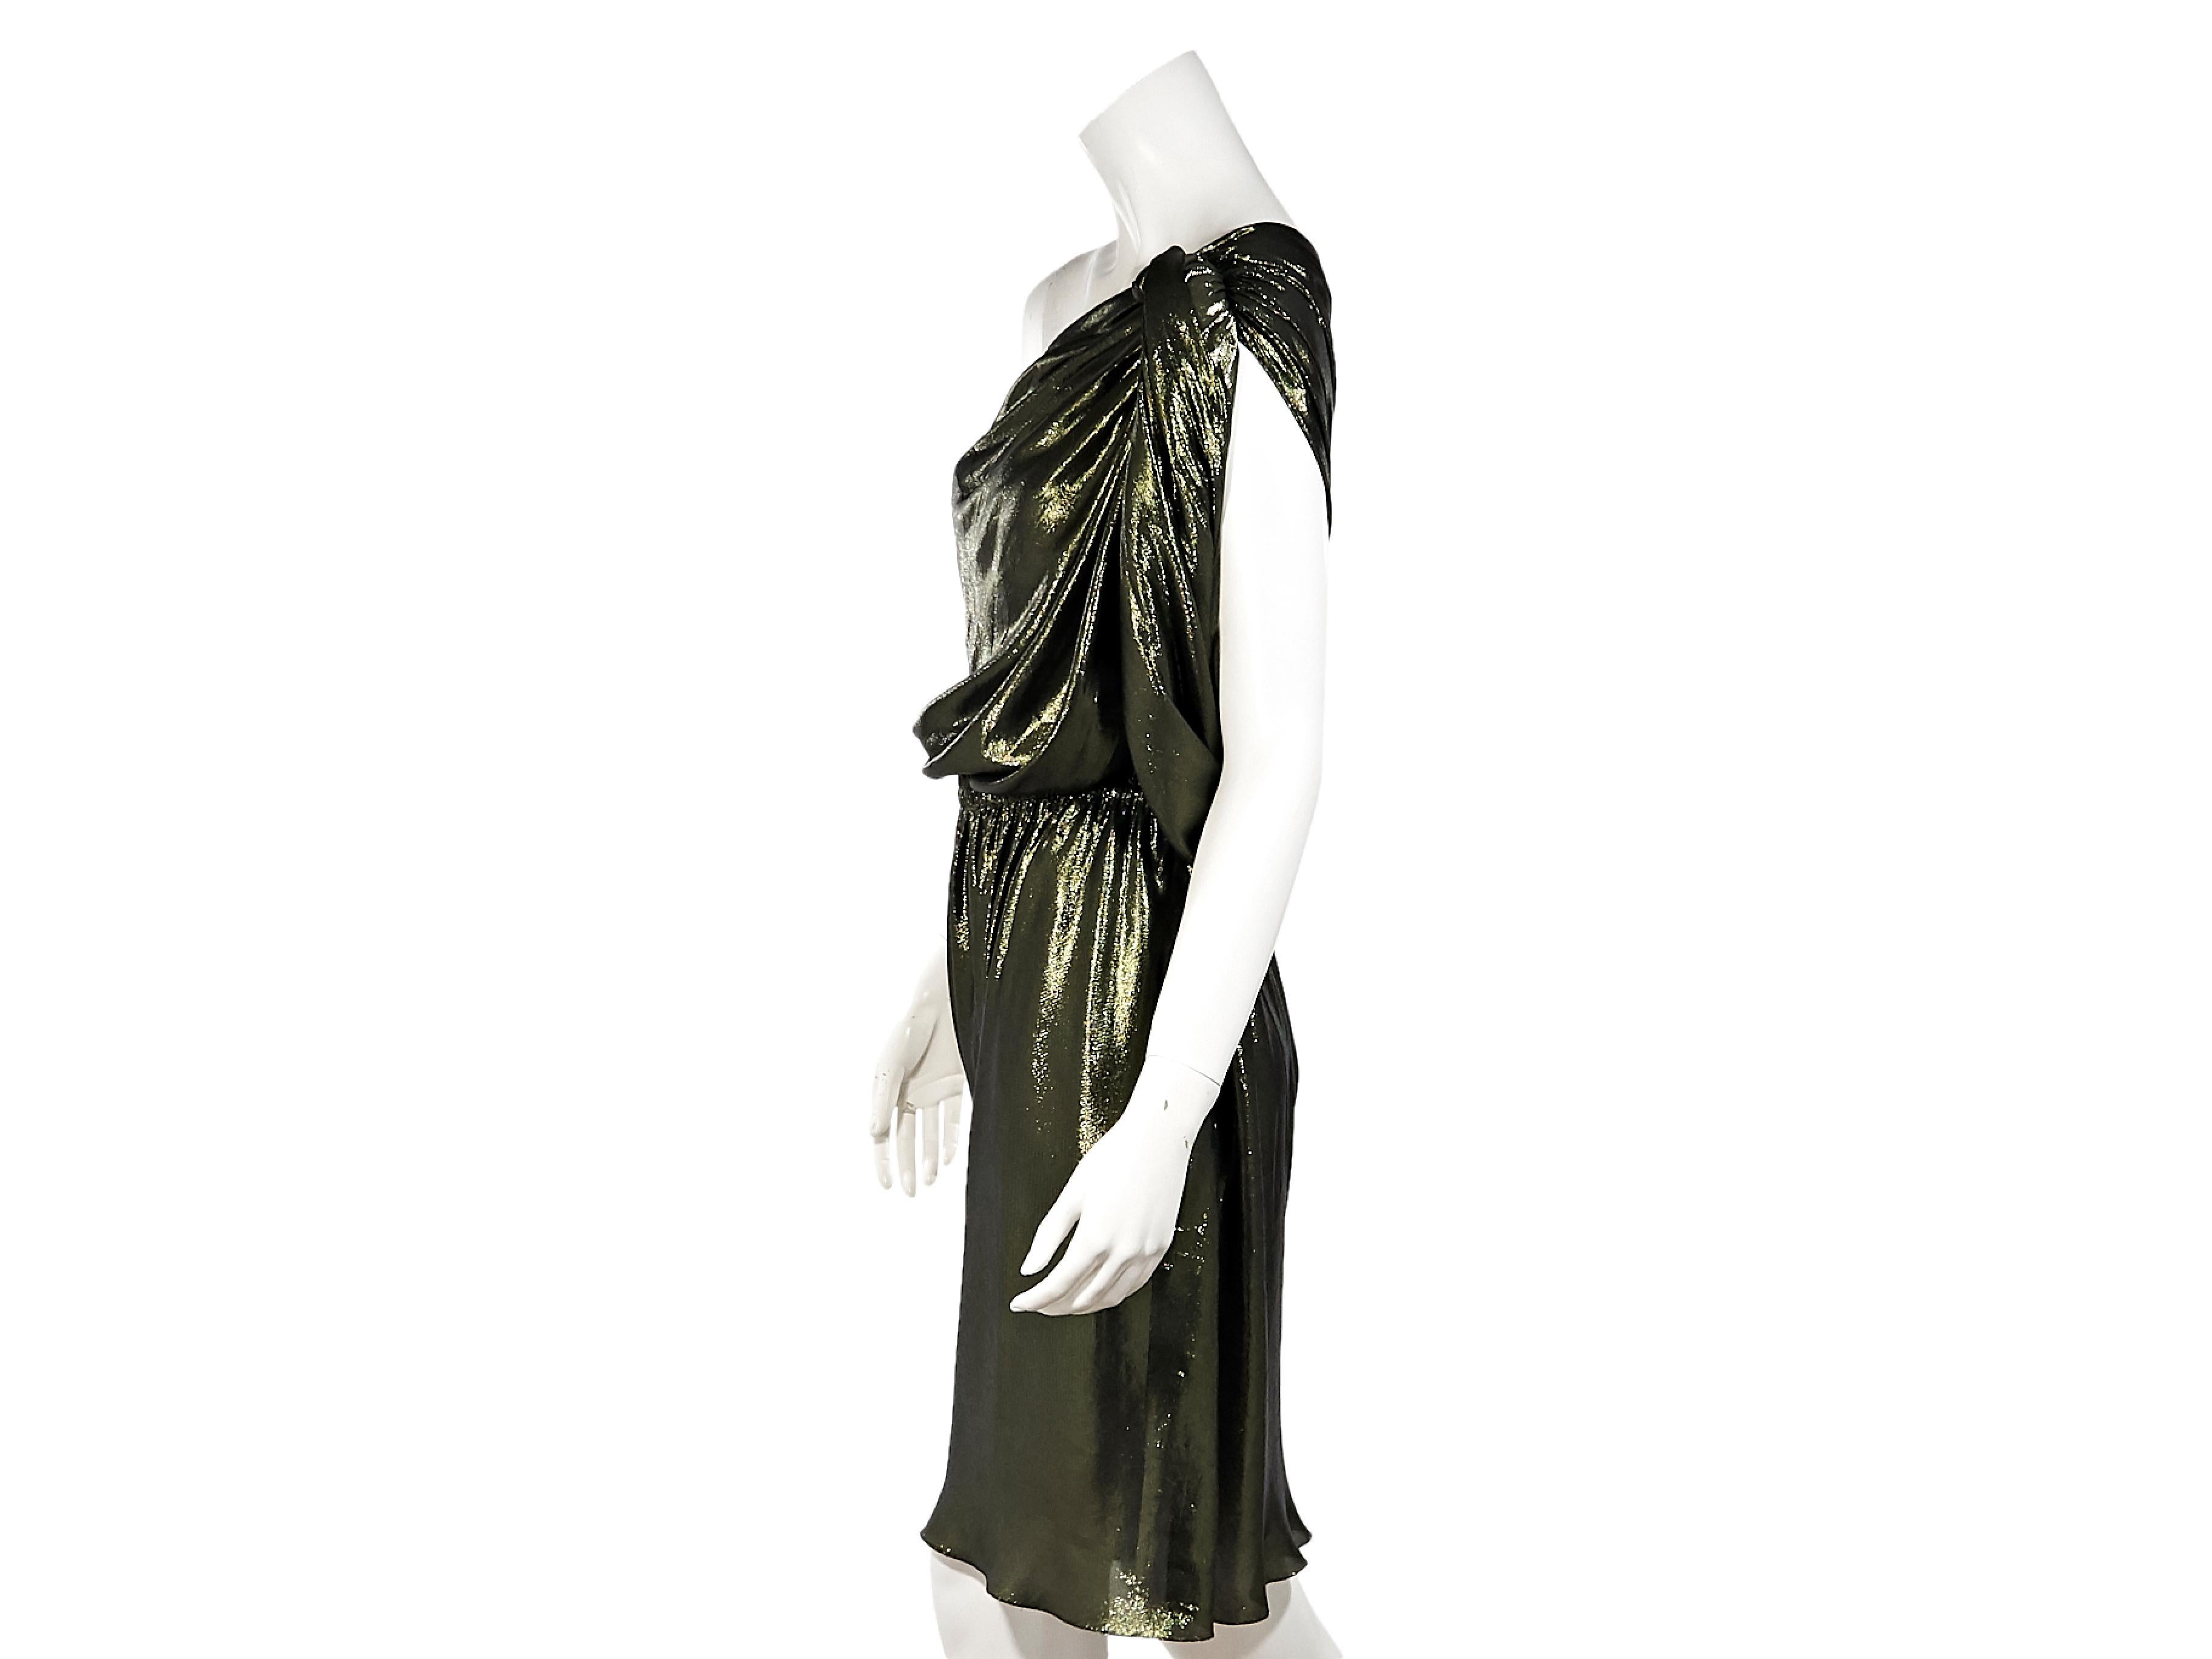 Product details:  Metallic green lame one-shoulder dress by Lanvin.  Gathered pleats at shoulder.  Elasticized waist.  Pullover style.  Label size FR 36.  32